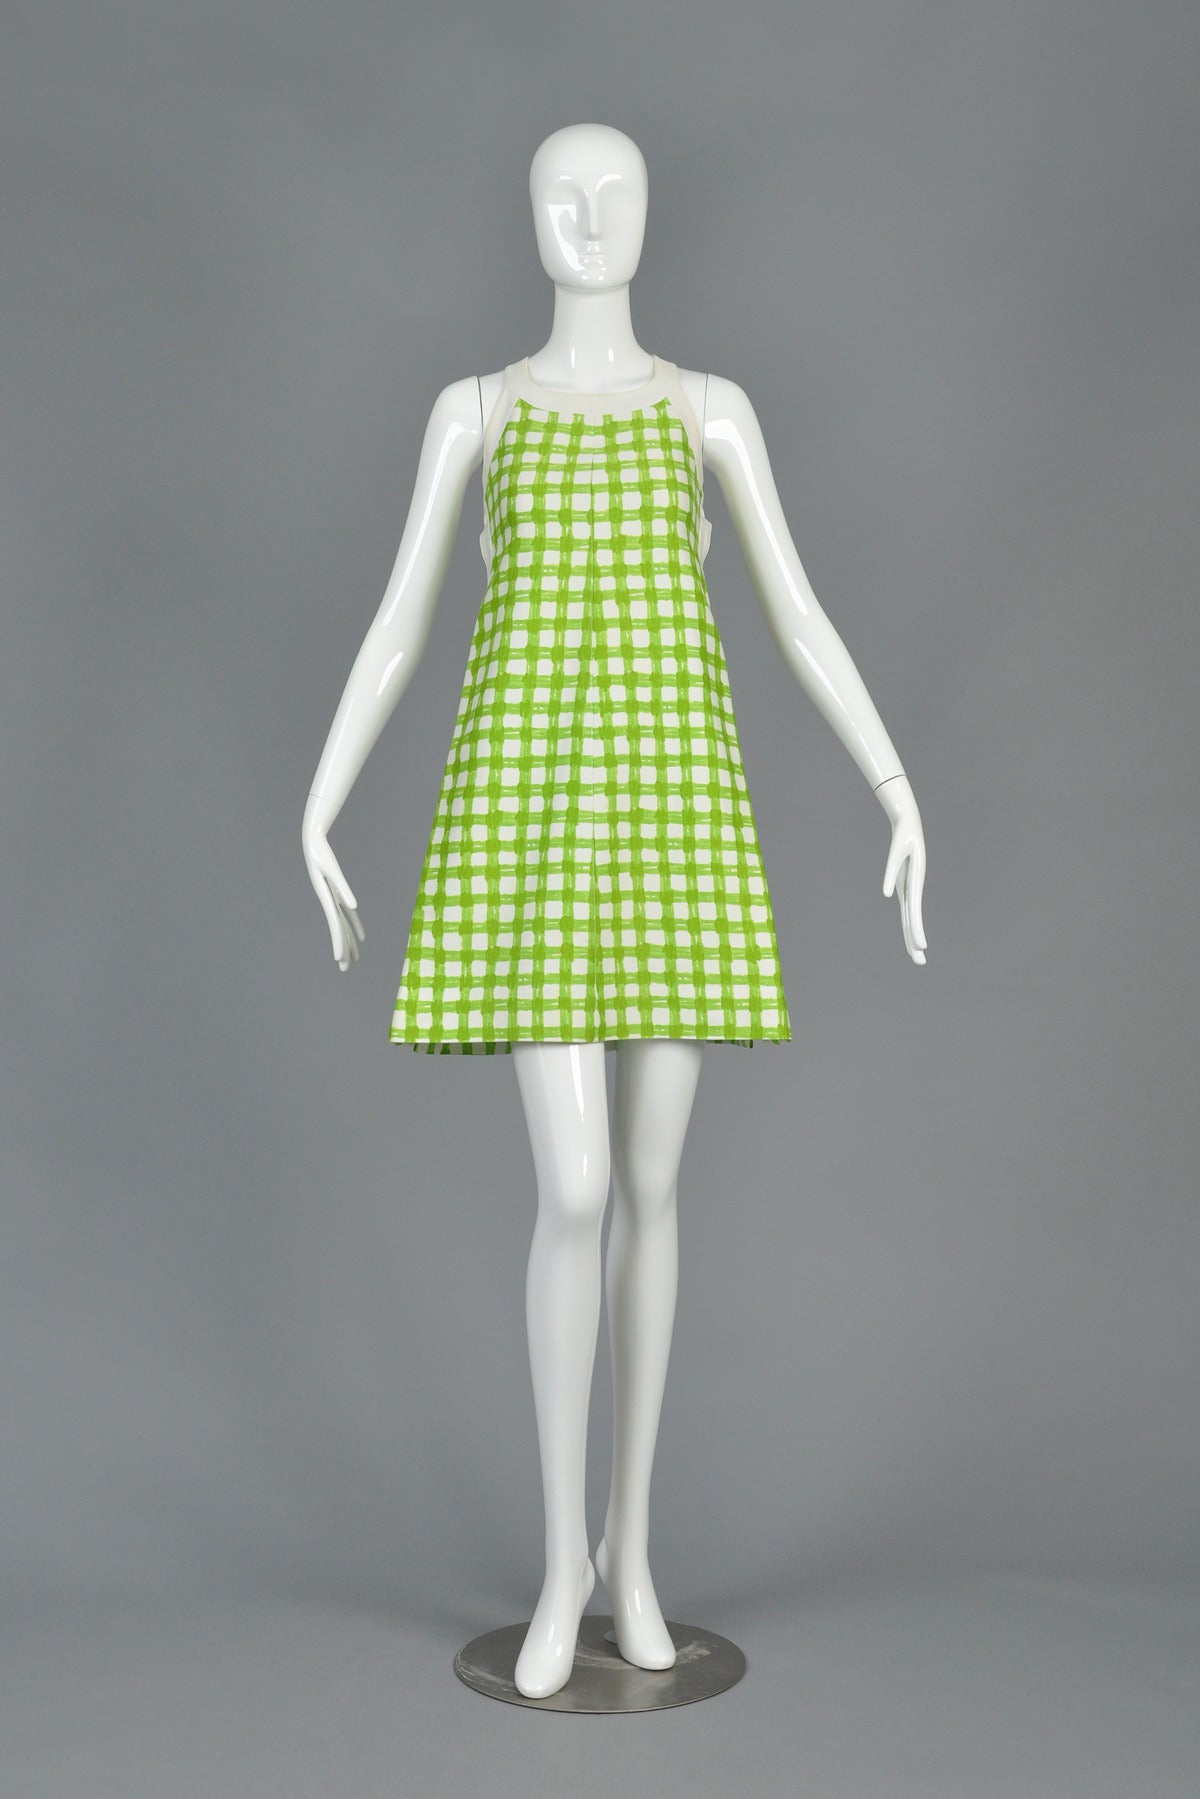 Amazing vintage 1960s/70s mod dress by Andre Courrèges. Fantastic painterly green + white plaid (a Courrèges staple since the label's inception). White trim + straps. Snap closure up both sides. Adjustable criss-cross straps in back. Fully labeled.